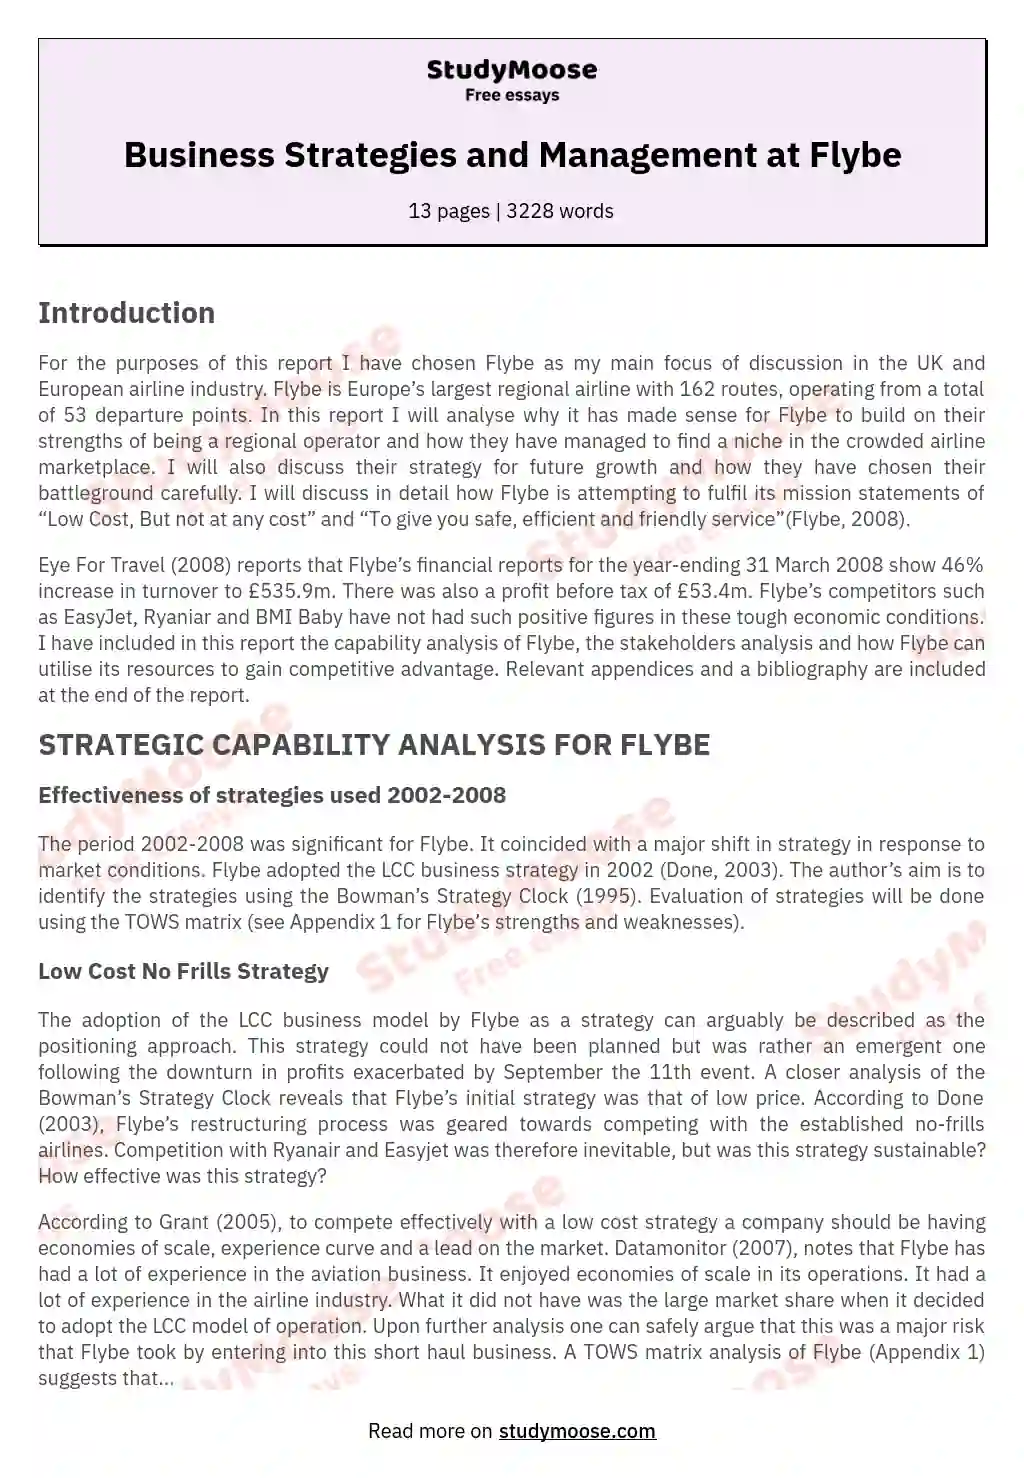 Business Strategies and Management at Flybe